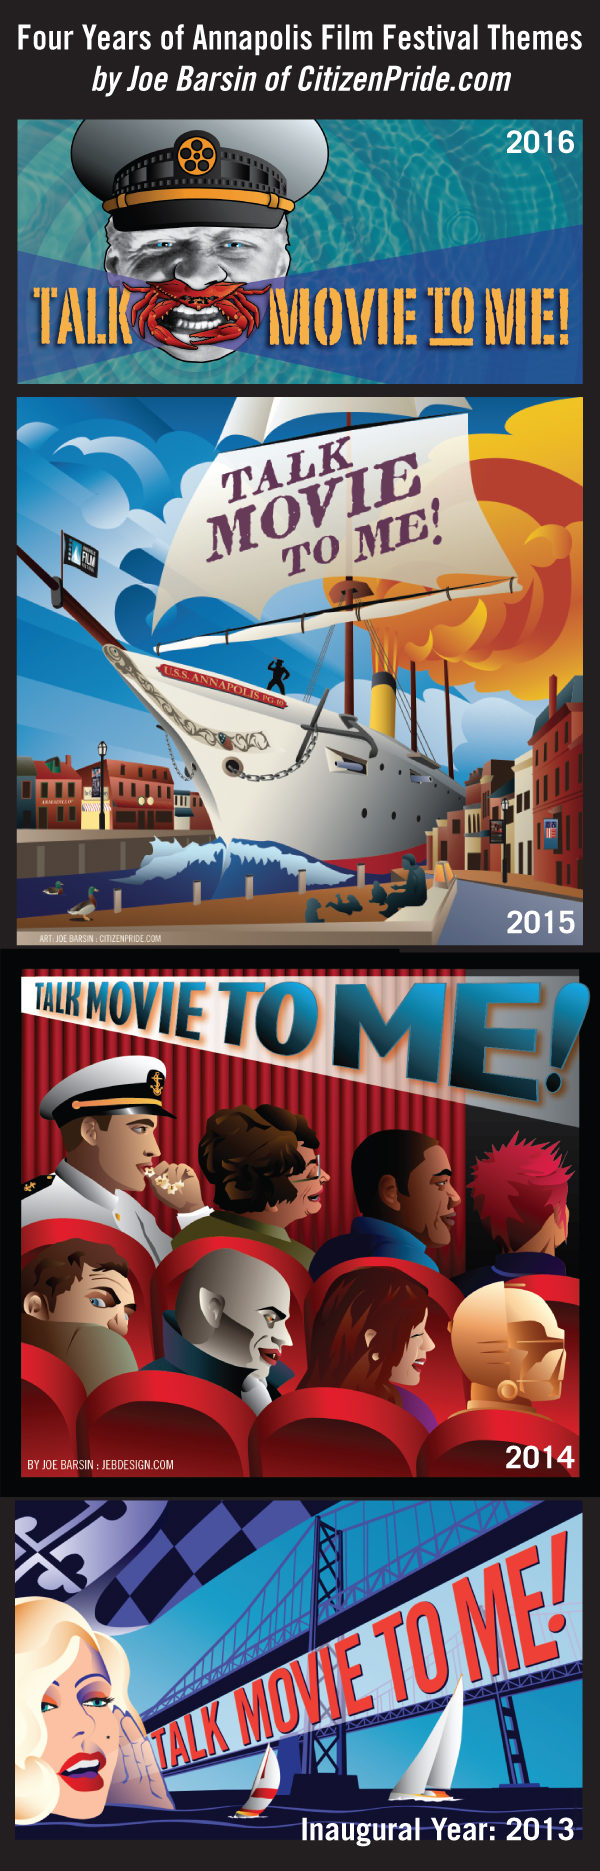 Annapolis Film Festival Posters from 2013, 2014, 2015 and 2016.